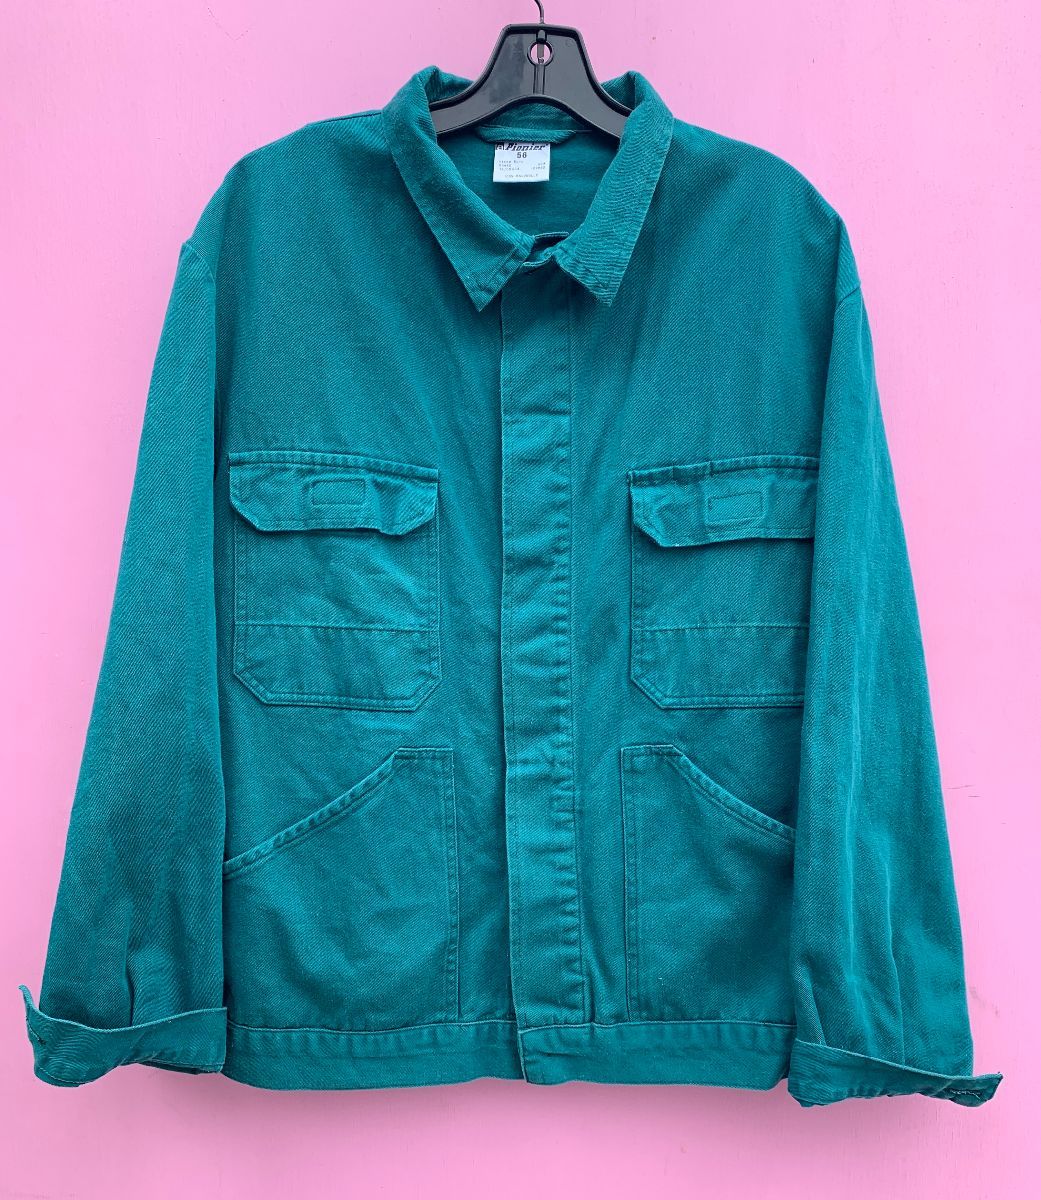 Rare Color Workwear Jacket Button Up Solid Cotton From Europe W/ 4 ...